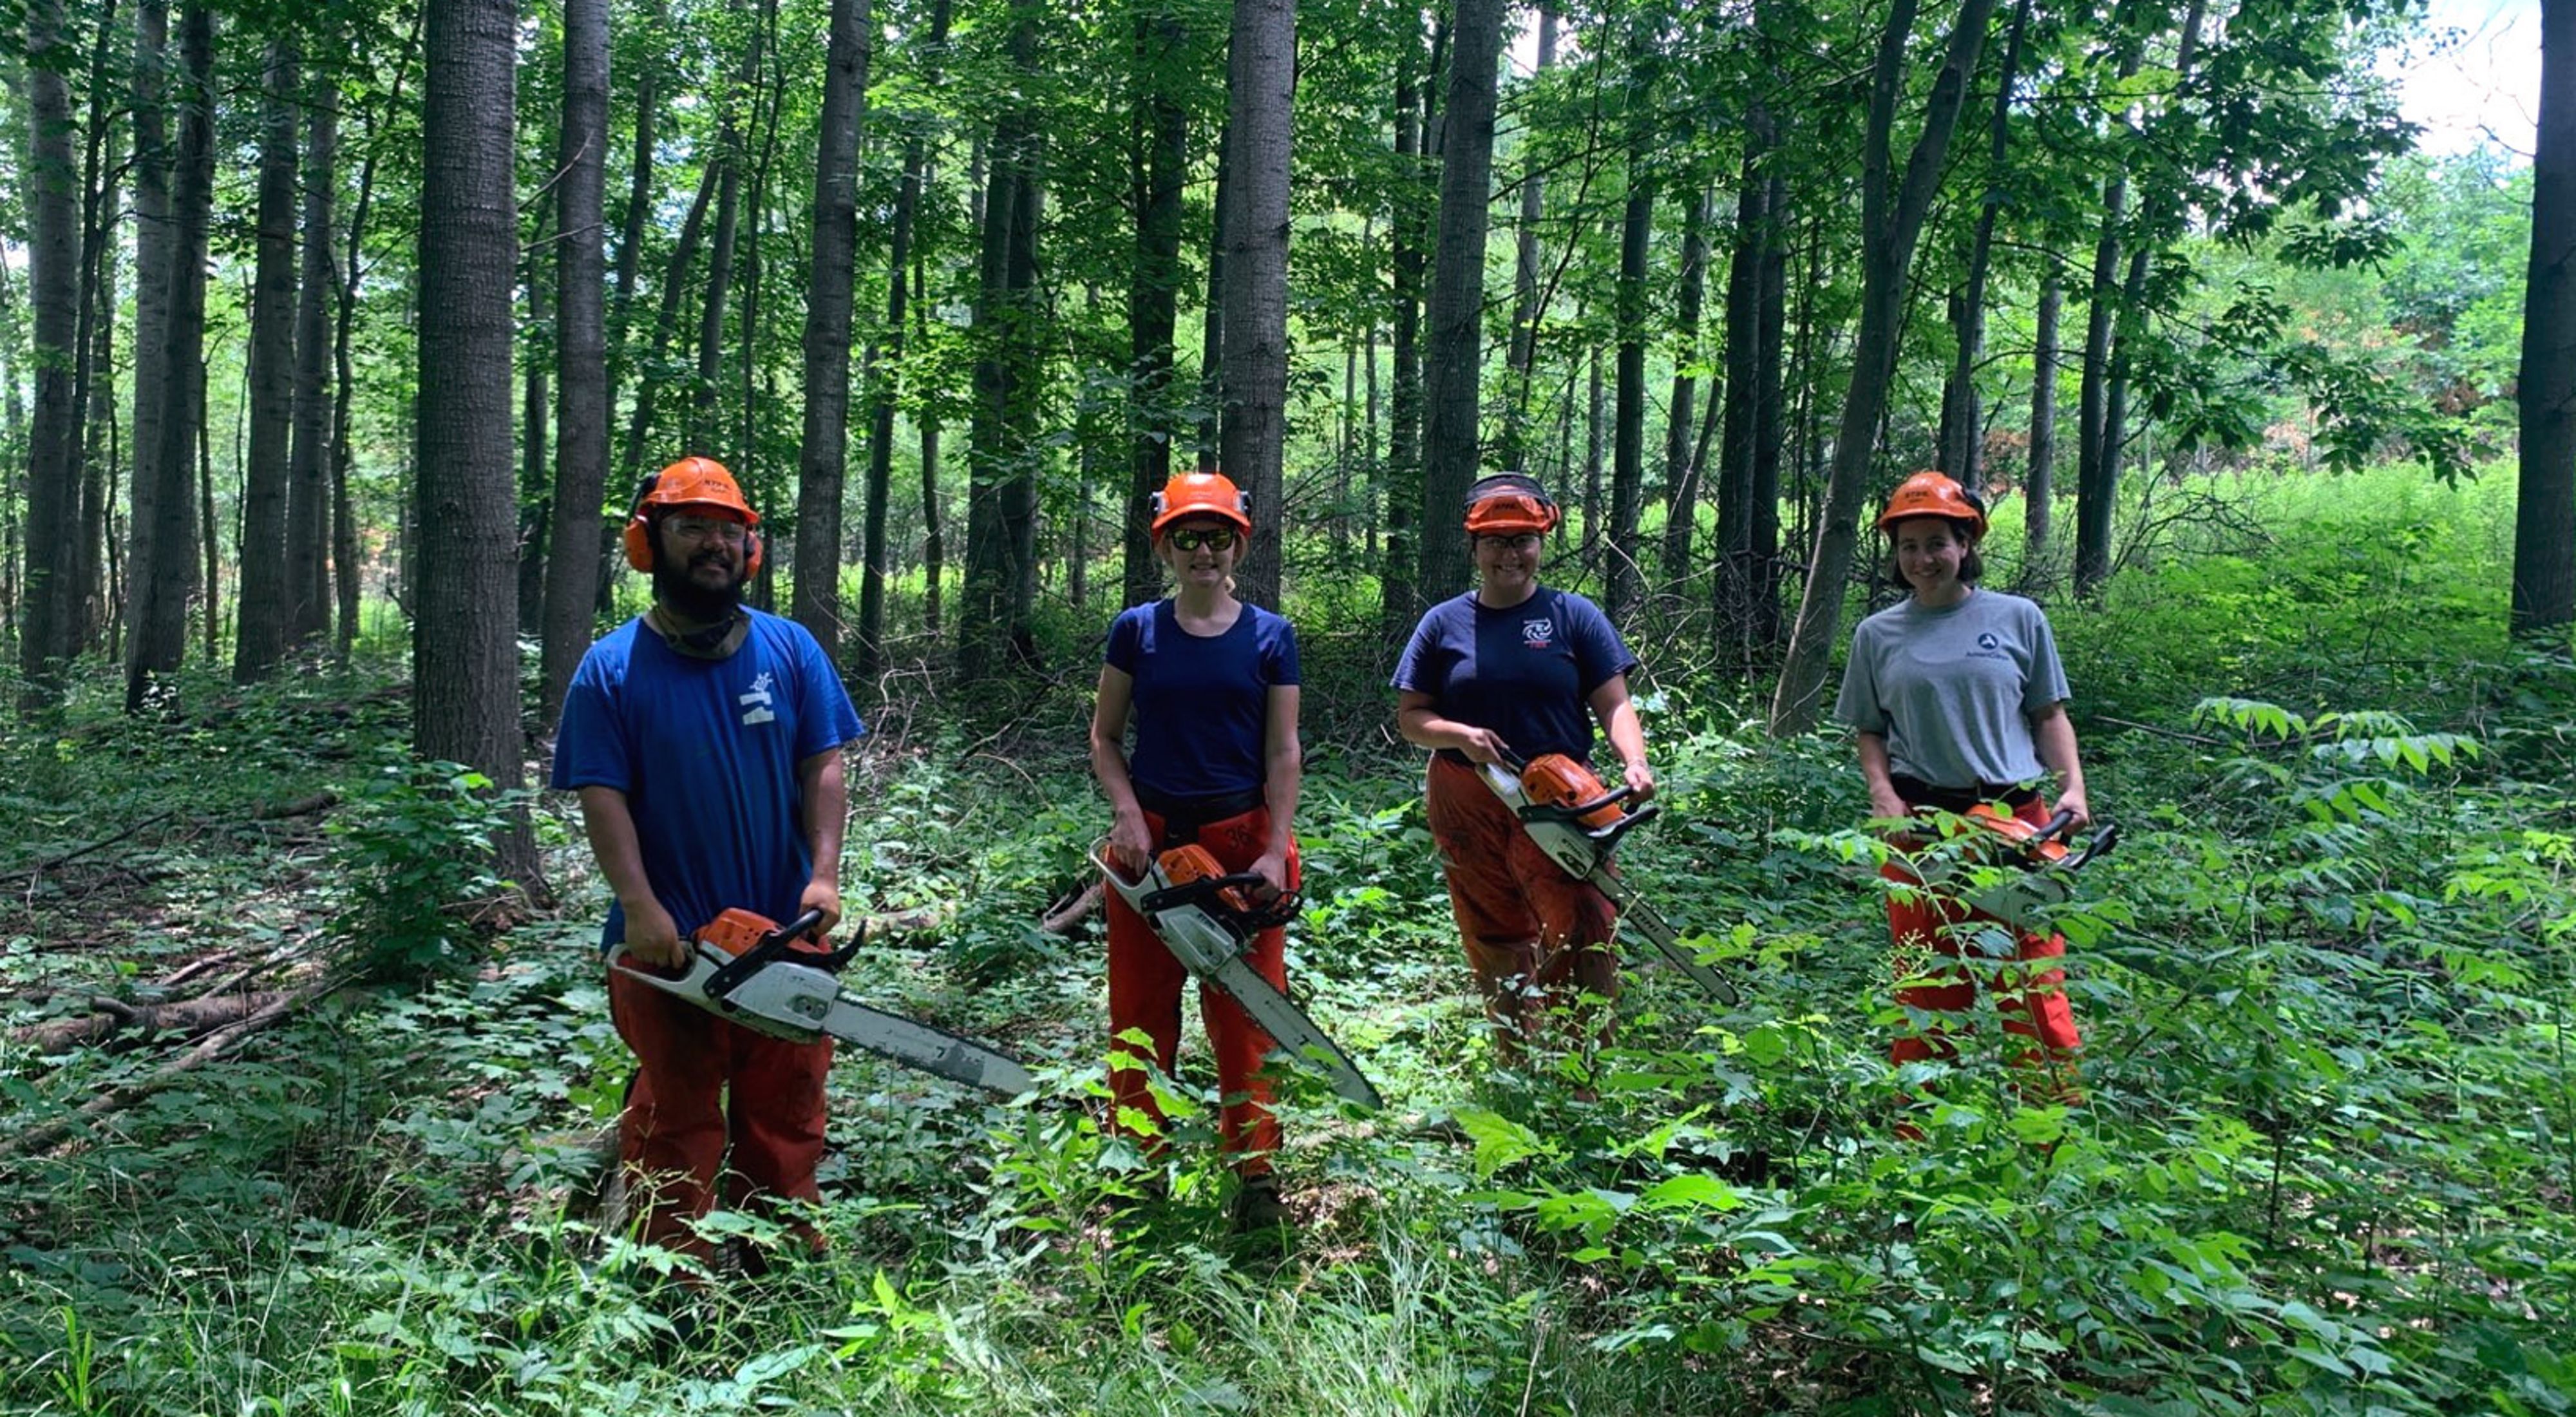 Fie Thao, Gabbi Genz, Karina Cardella and Bobbi Rooney stand in a row in the middle of a green forest, each holding a chainsaw and wearing protective gear, all smiling. 